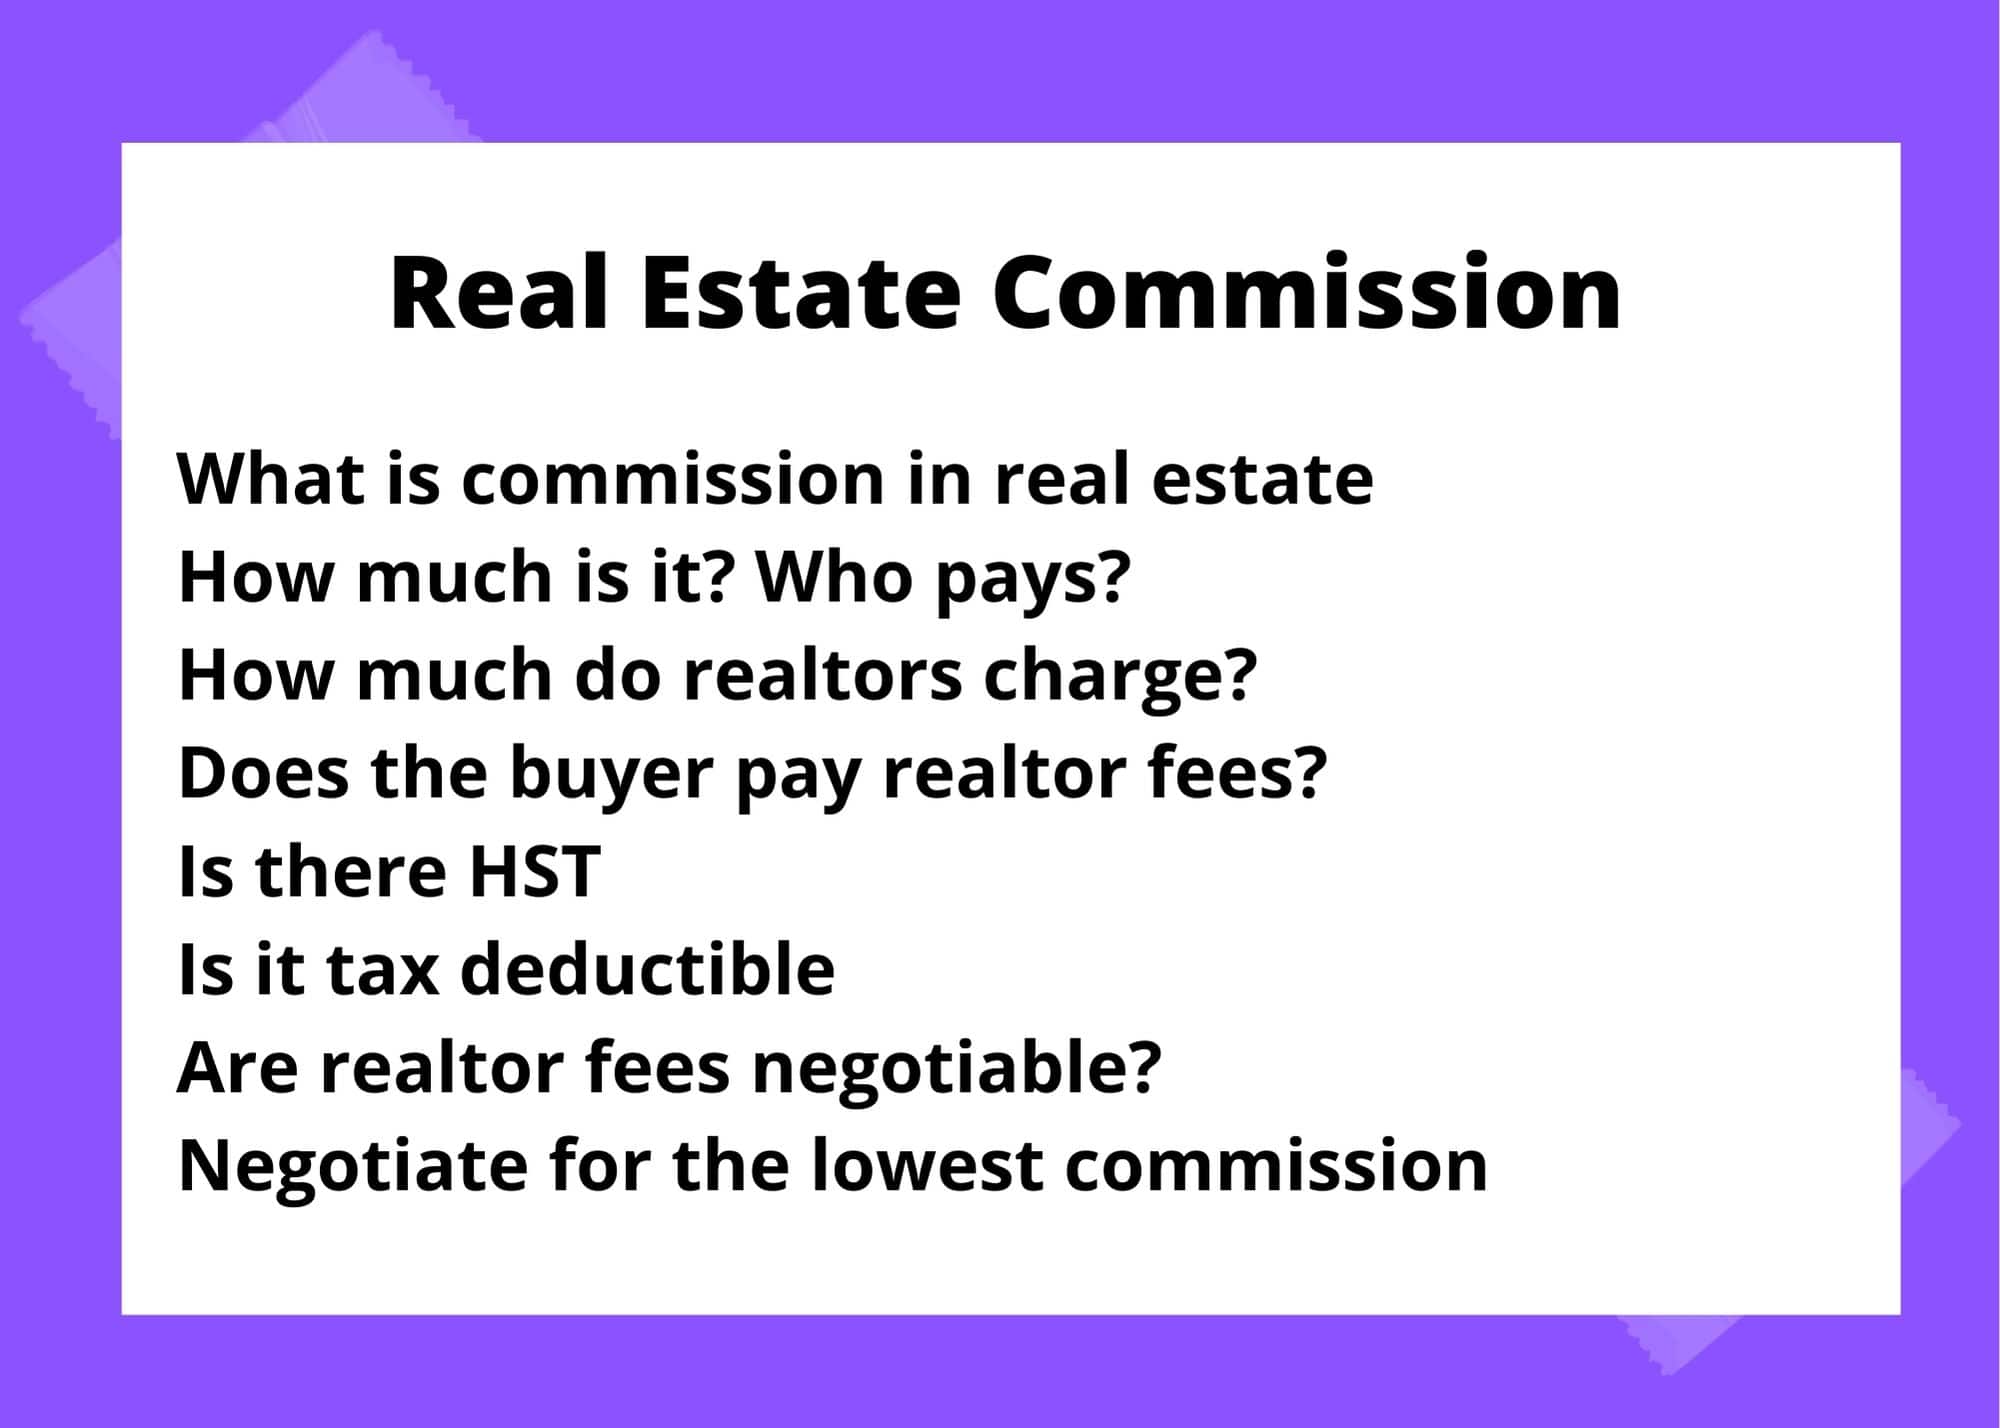 Realsav Commission in Real Estate Complete Q&A